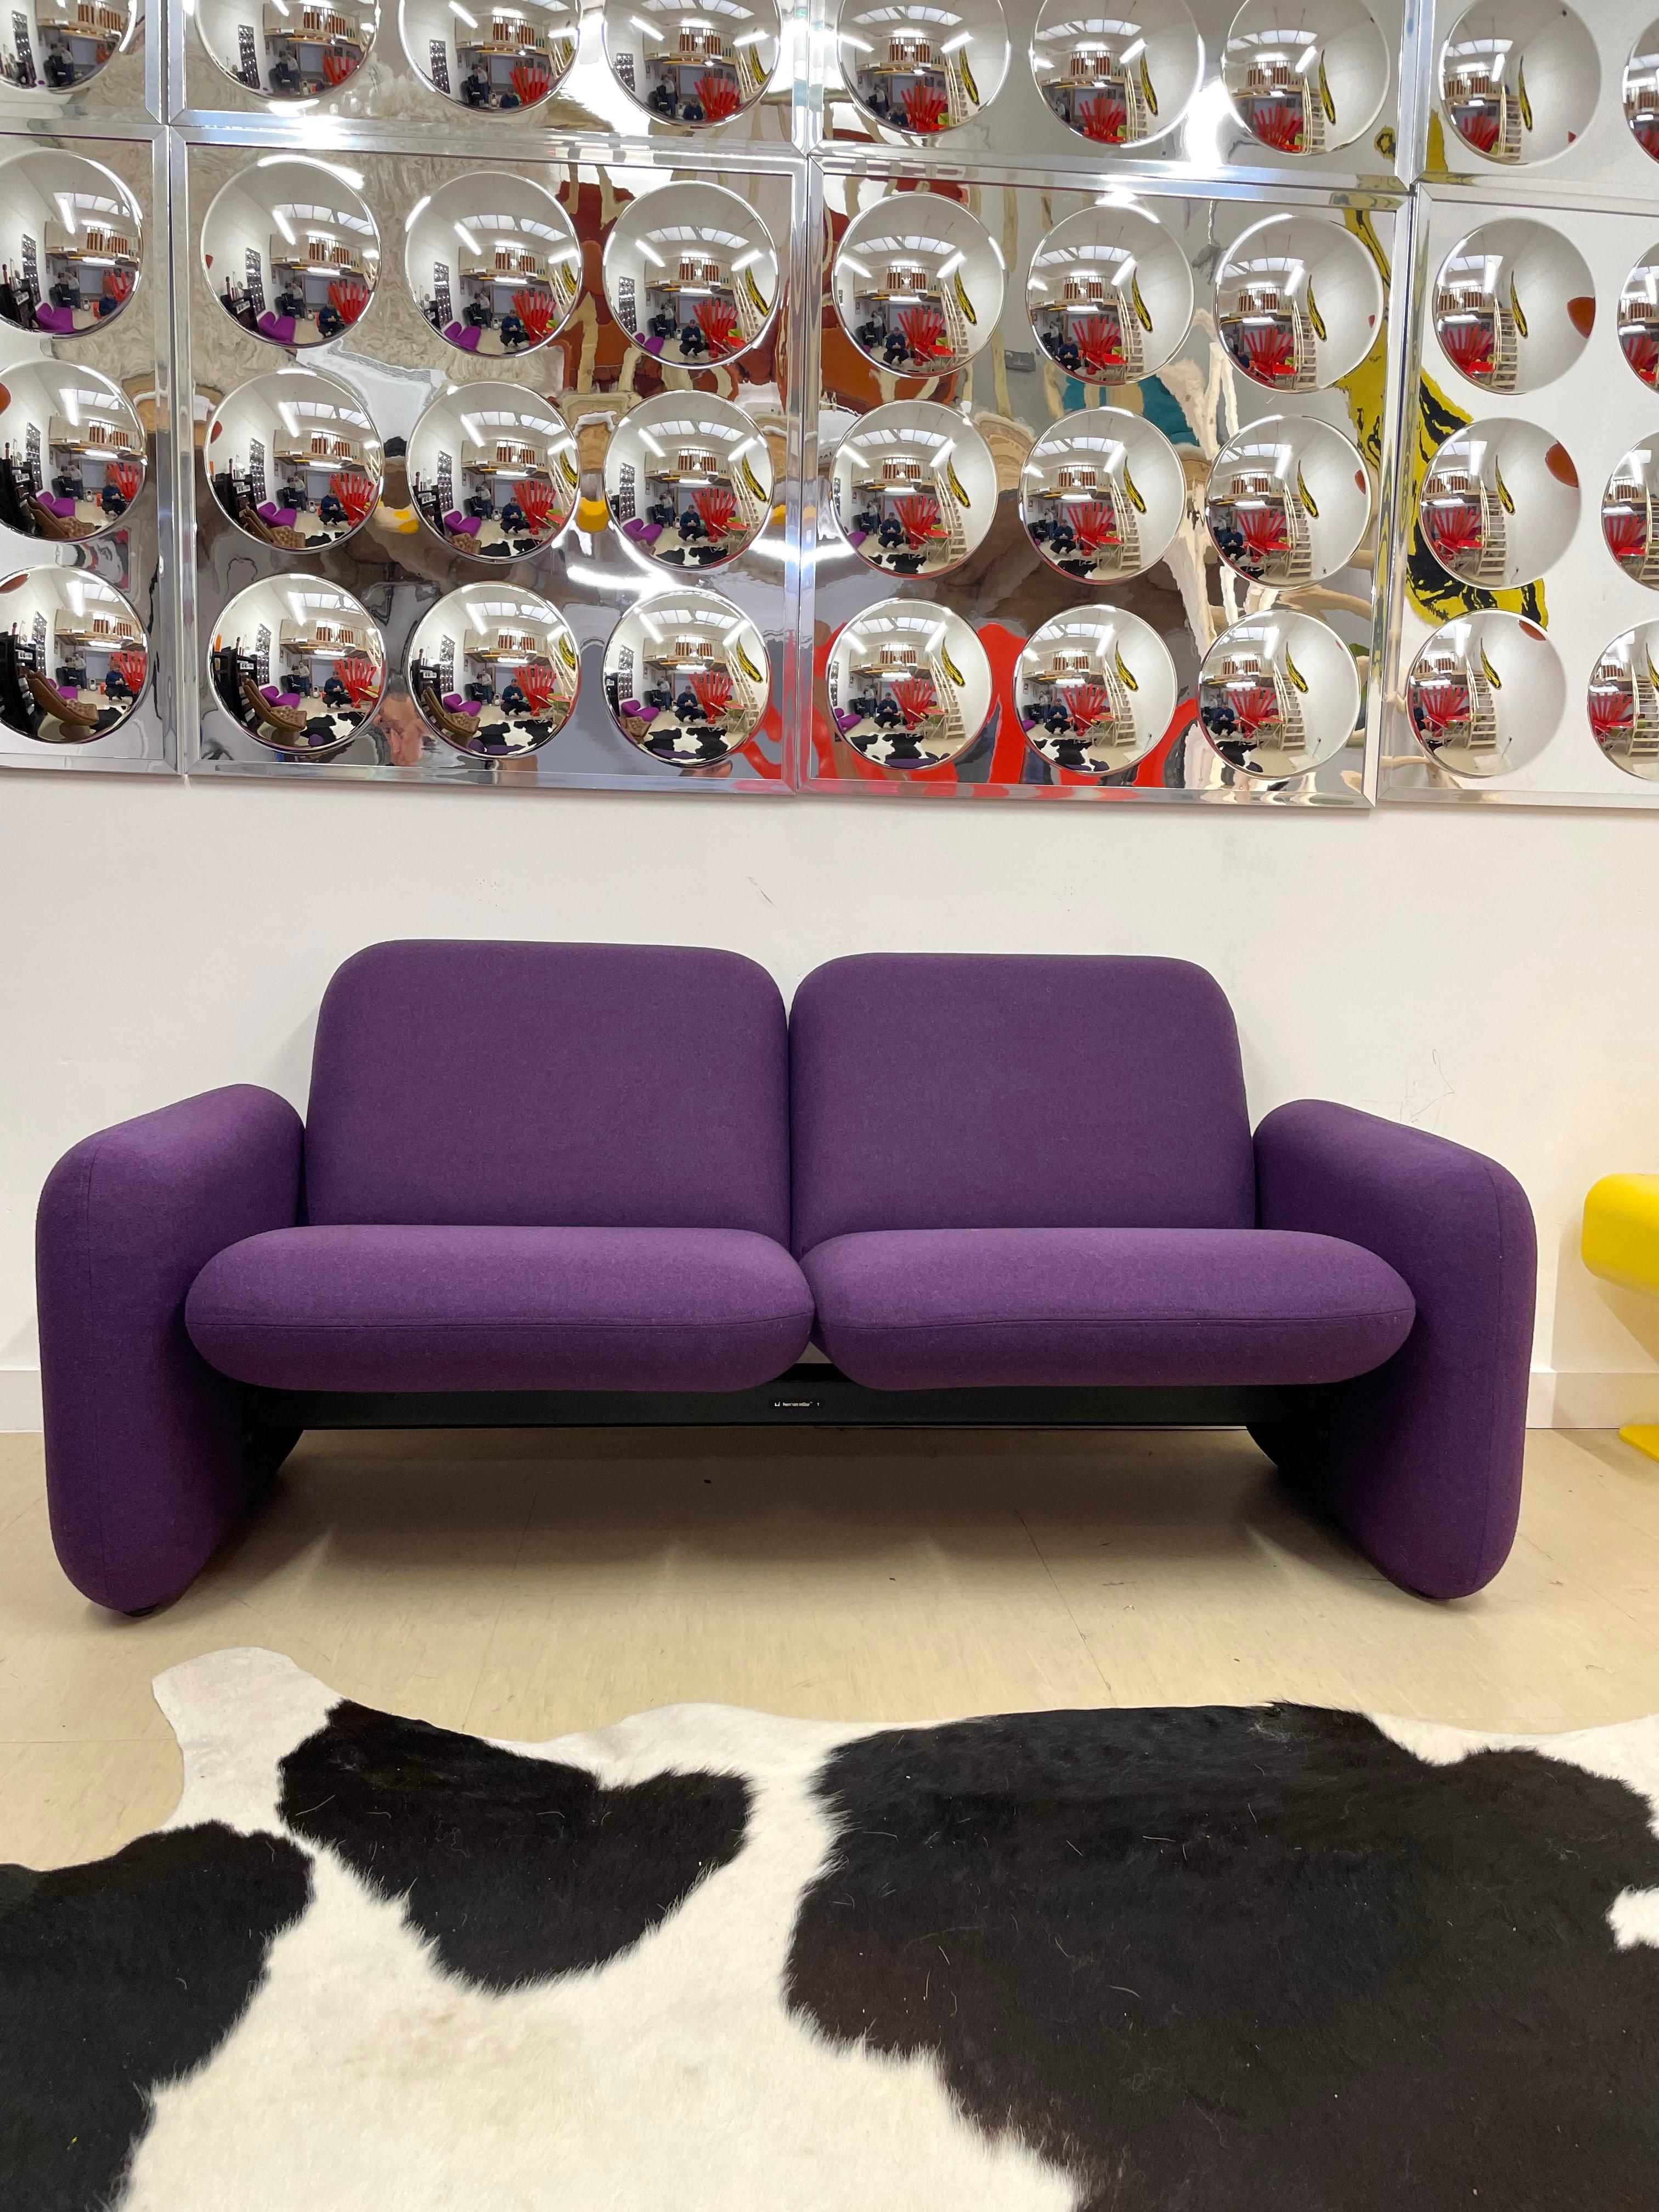 This has now sold do not purchase !

Designed by Ray Wilkes for Herman Miller and first introduced in 1976, this original eye-catching modular sofa made a lasting impression with bold, rounded-edge cushions. Steel brackets joining the seat and back